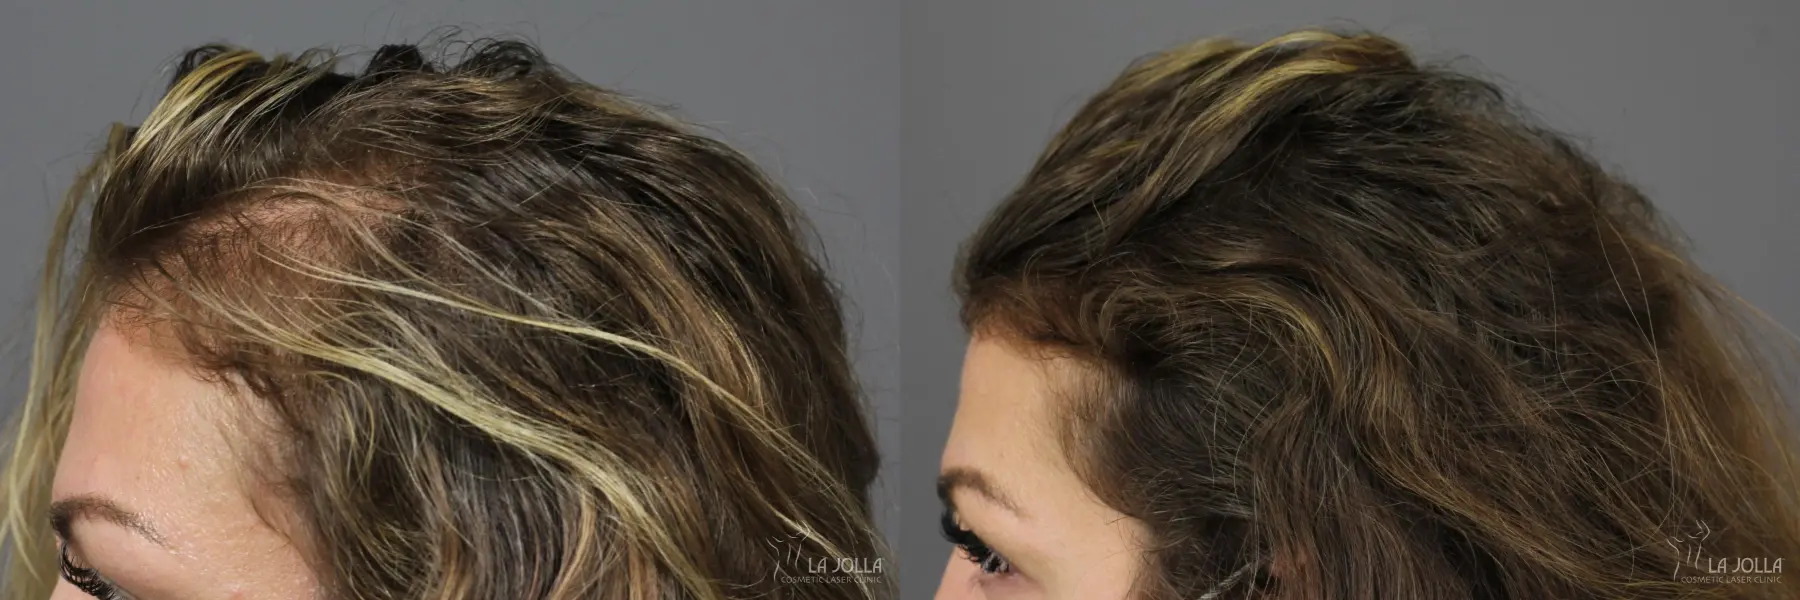 PRP (Platelet-Rich Plasma): Patient 3 - Before and After 2